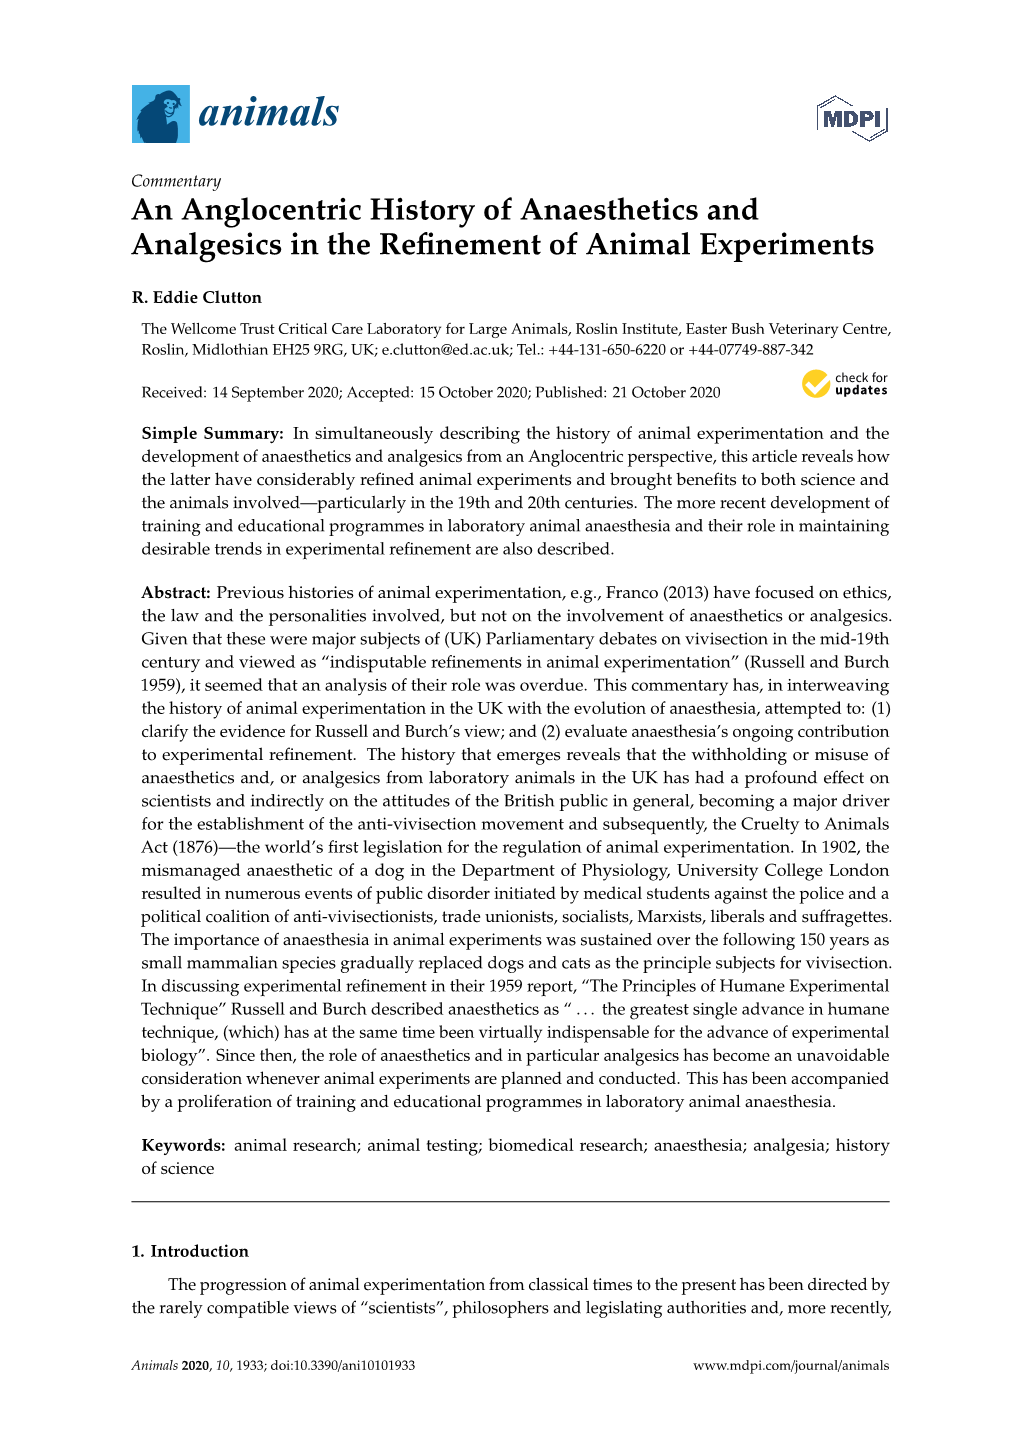 An Anglocentric History of Anaesthetics and Analgesics in the Reﬁnement of Animal Experiments